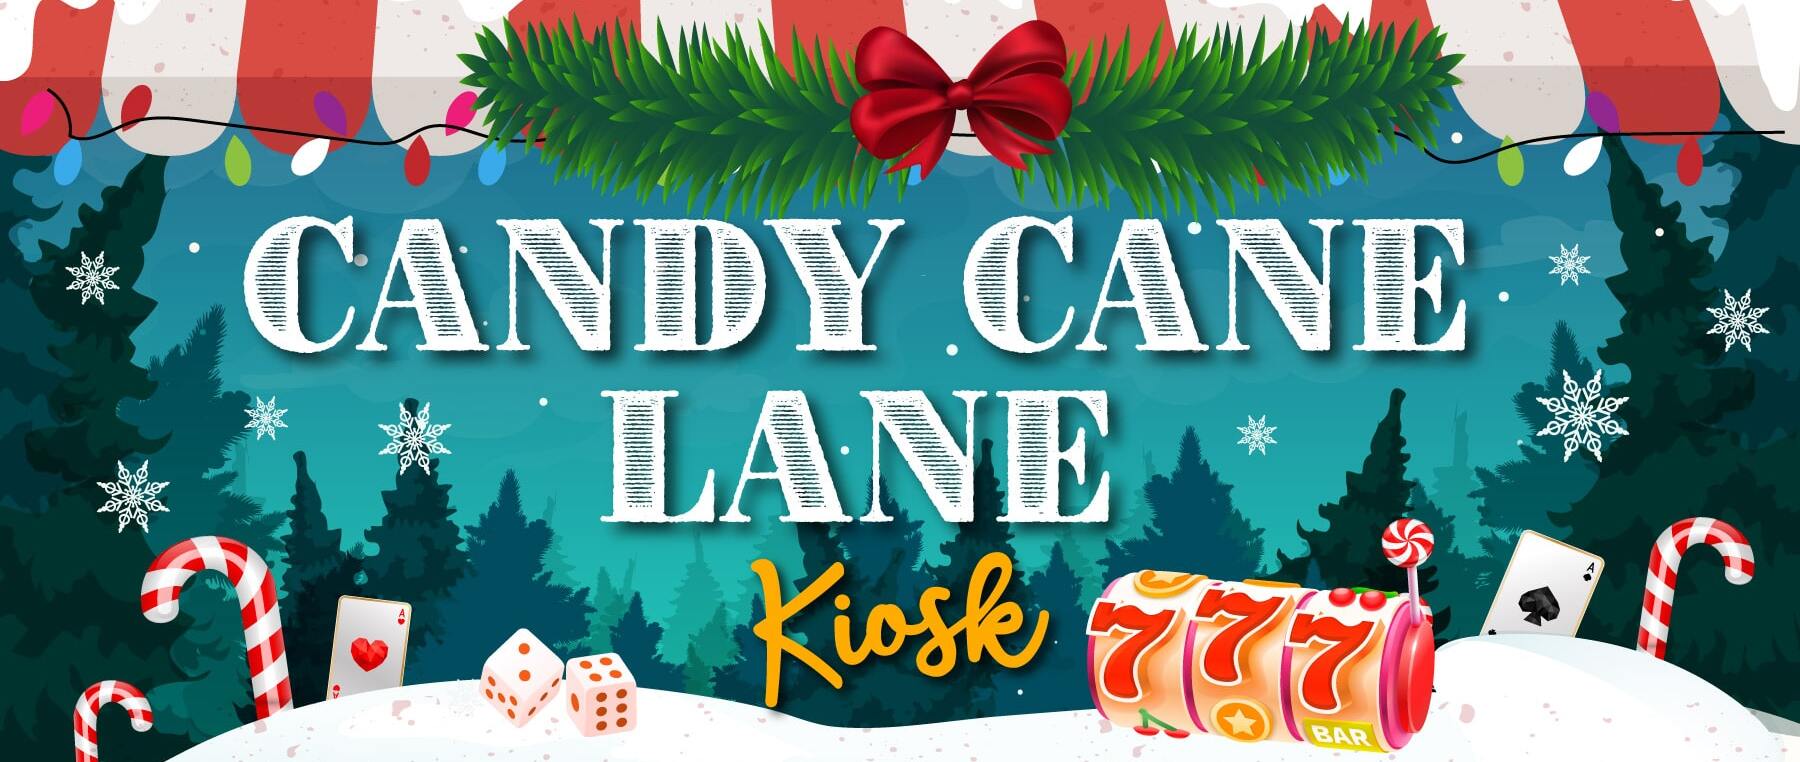 Candy Cane lane kiosk promotion at Point place casino